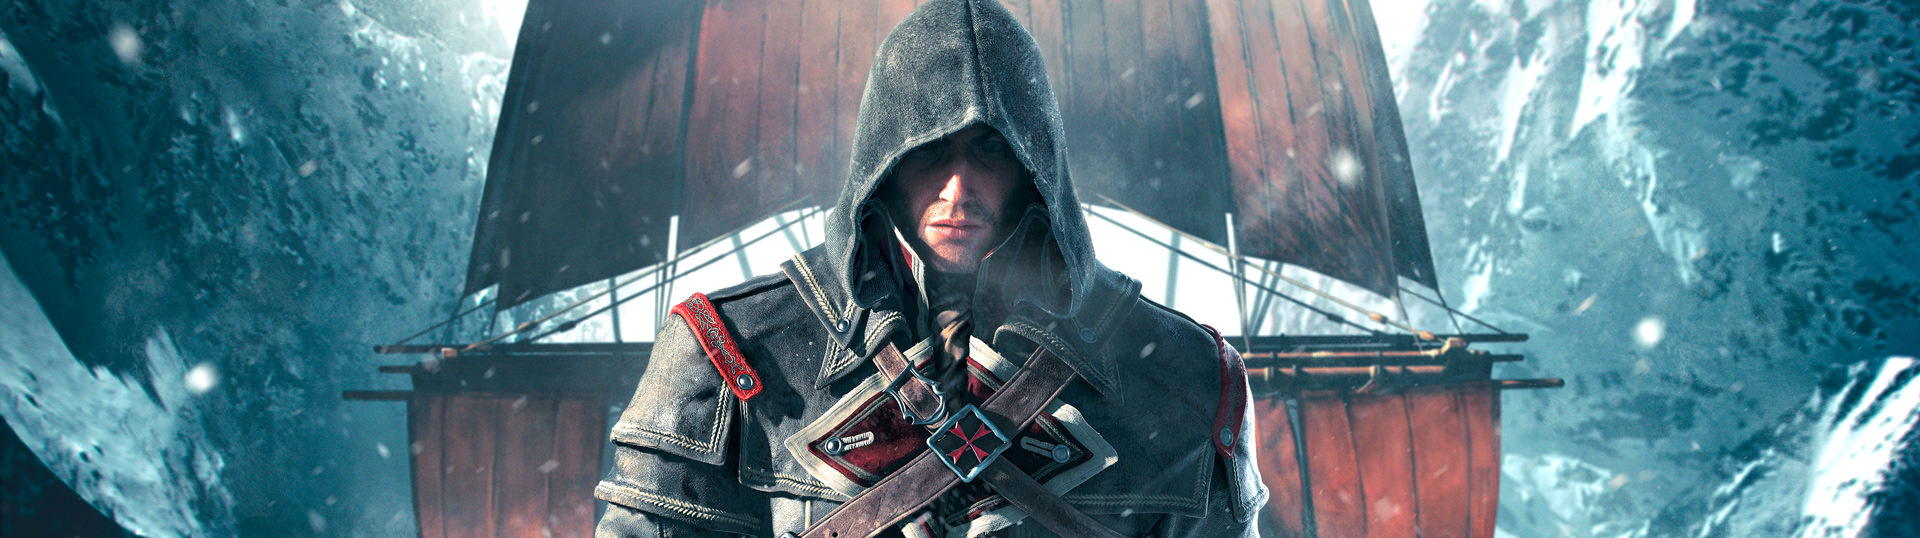 Assassin's Creed Rogue PC Release Date Announced